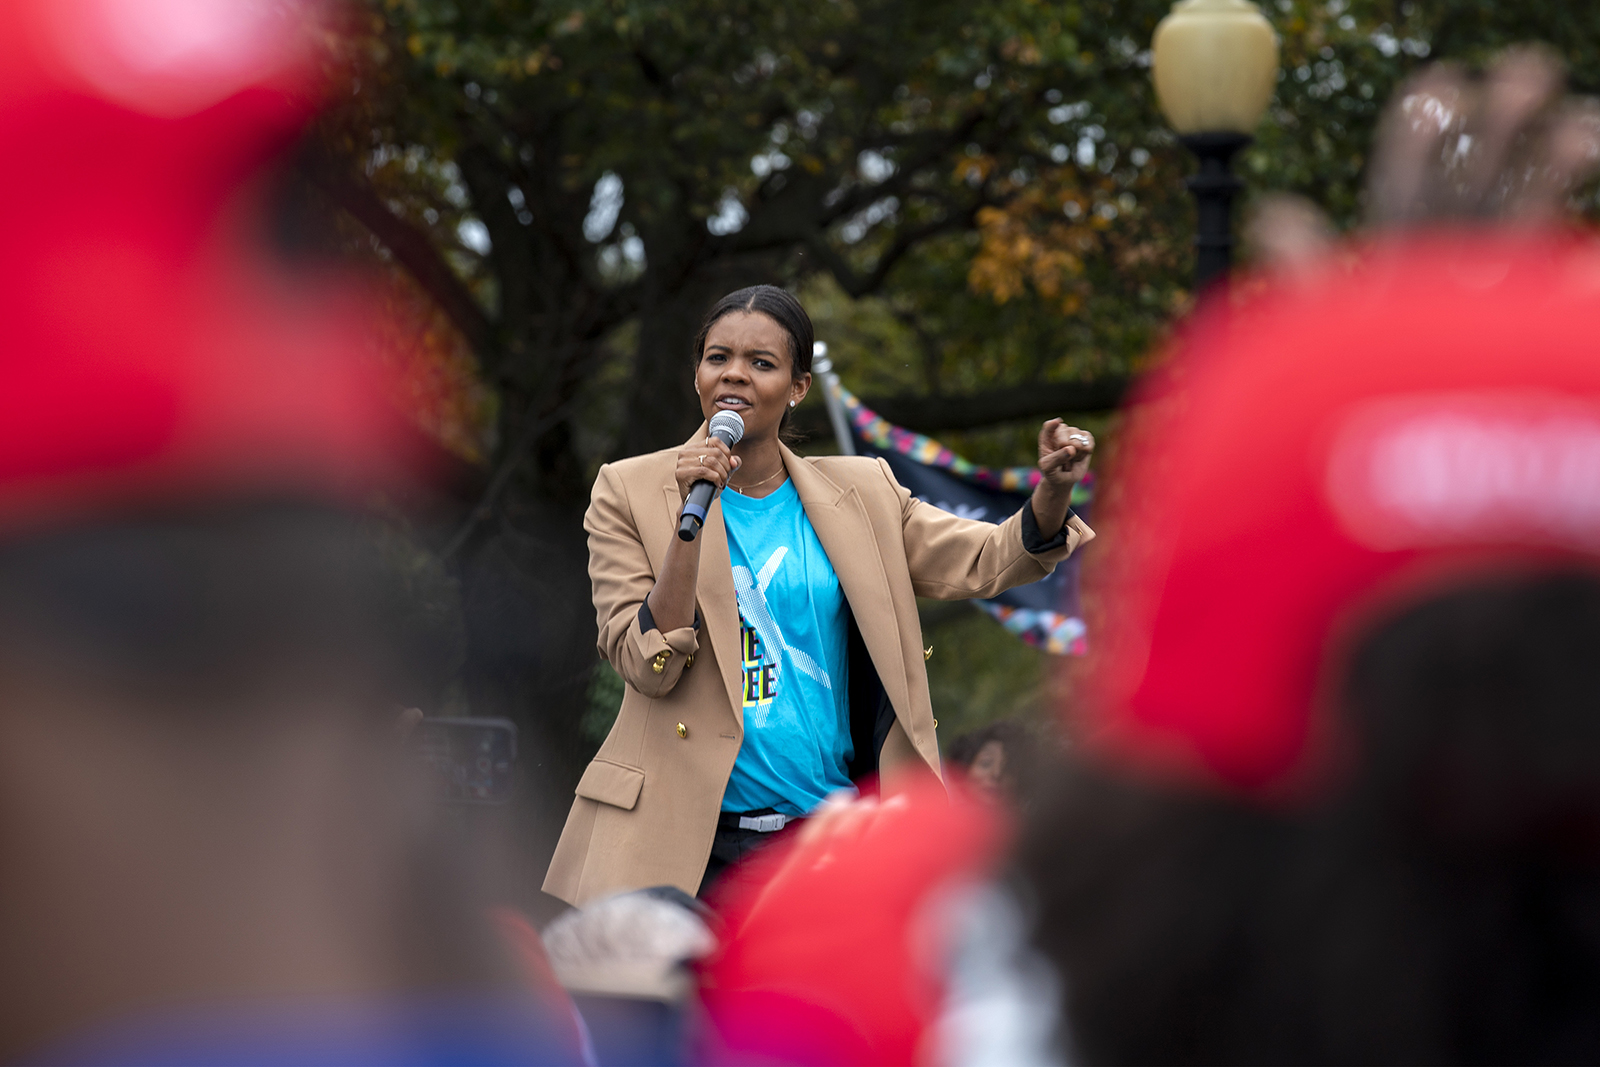 Conservative commentator and political activist Candace Owens speaks at the White House Oval rally Saturday, Oct. 10, 2020, in Washington.  (AP Photo/Jose Luis Magana)